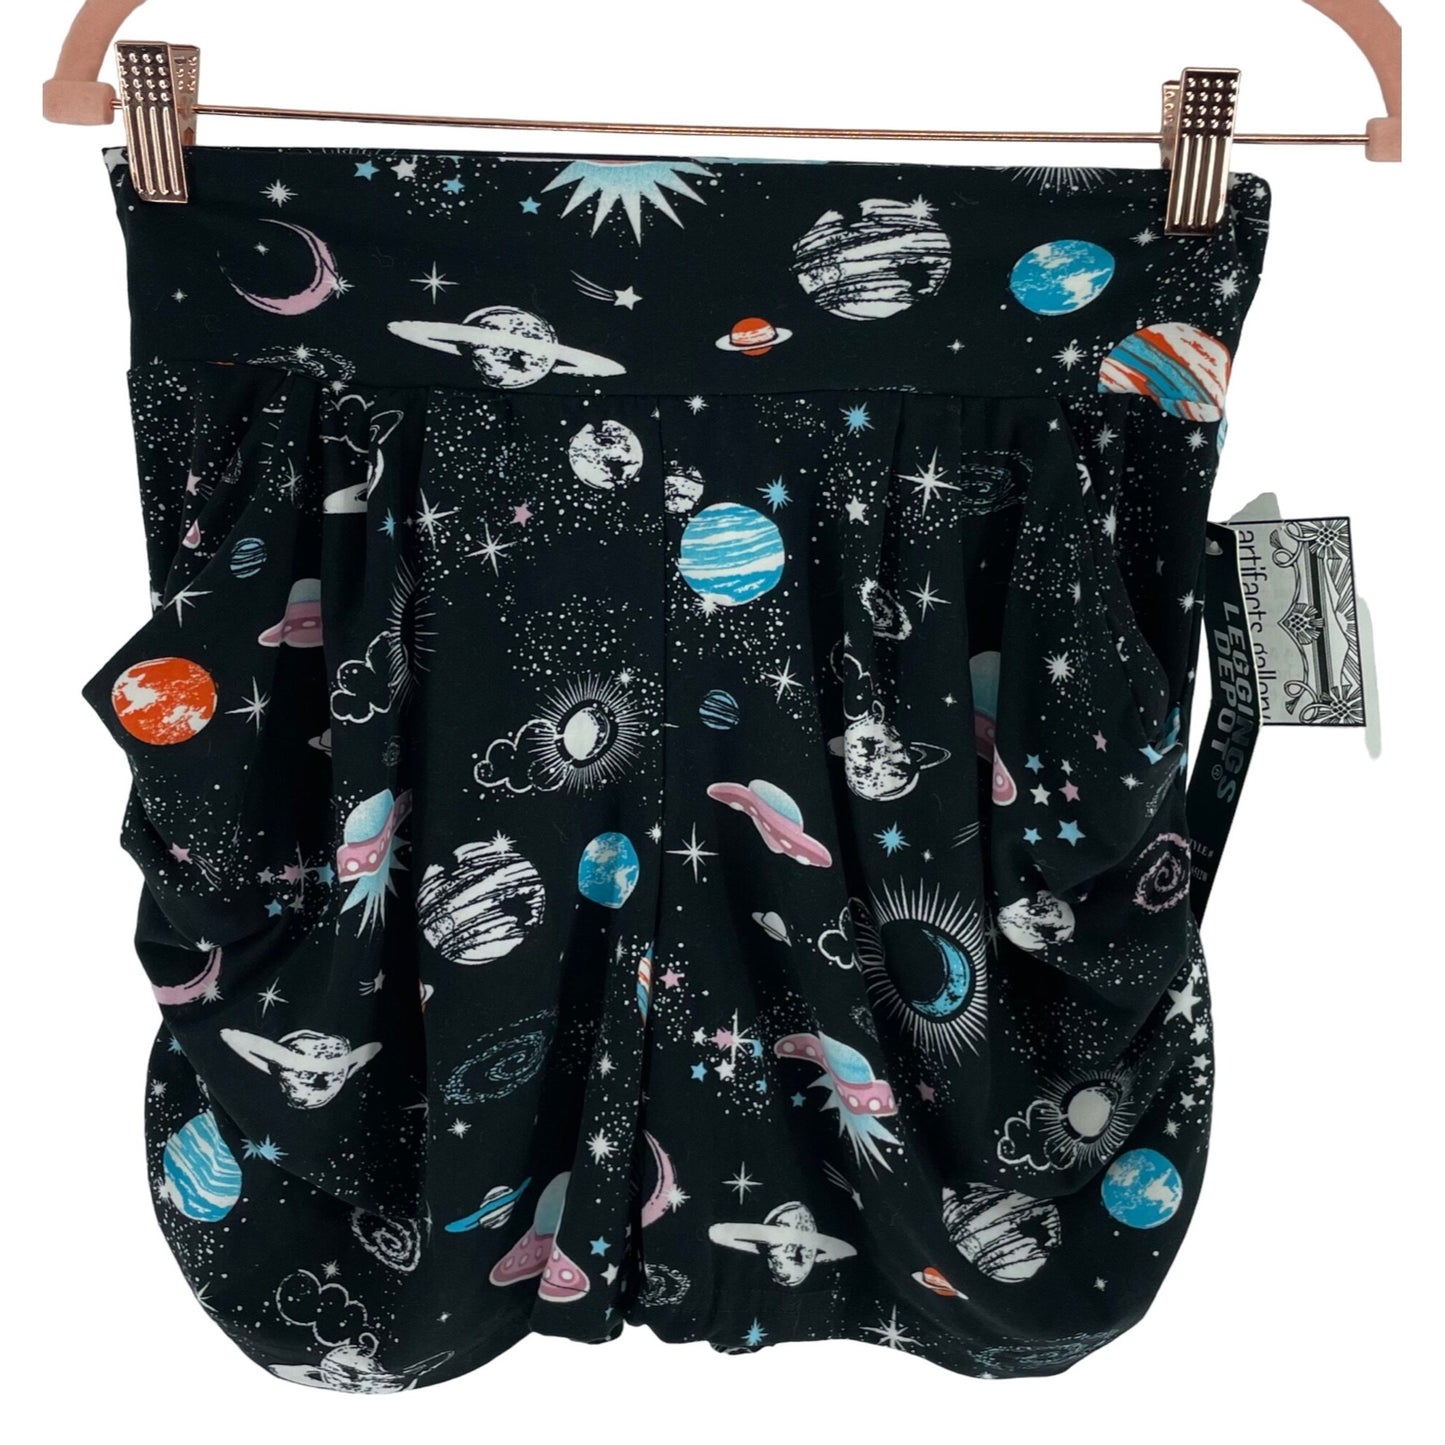 Leggings Depot NWT Women's Size Large Black & Multi-Colored Outer Space Yoga Shorts